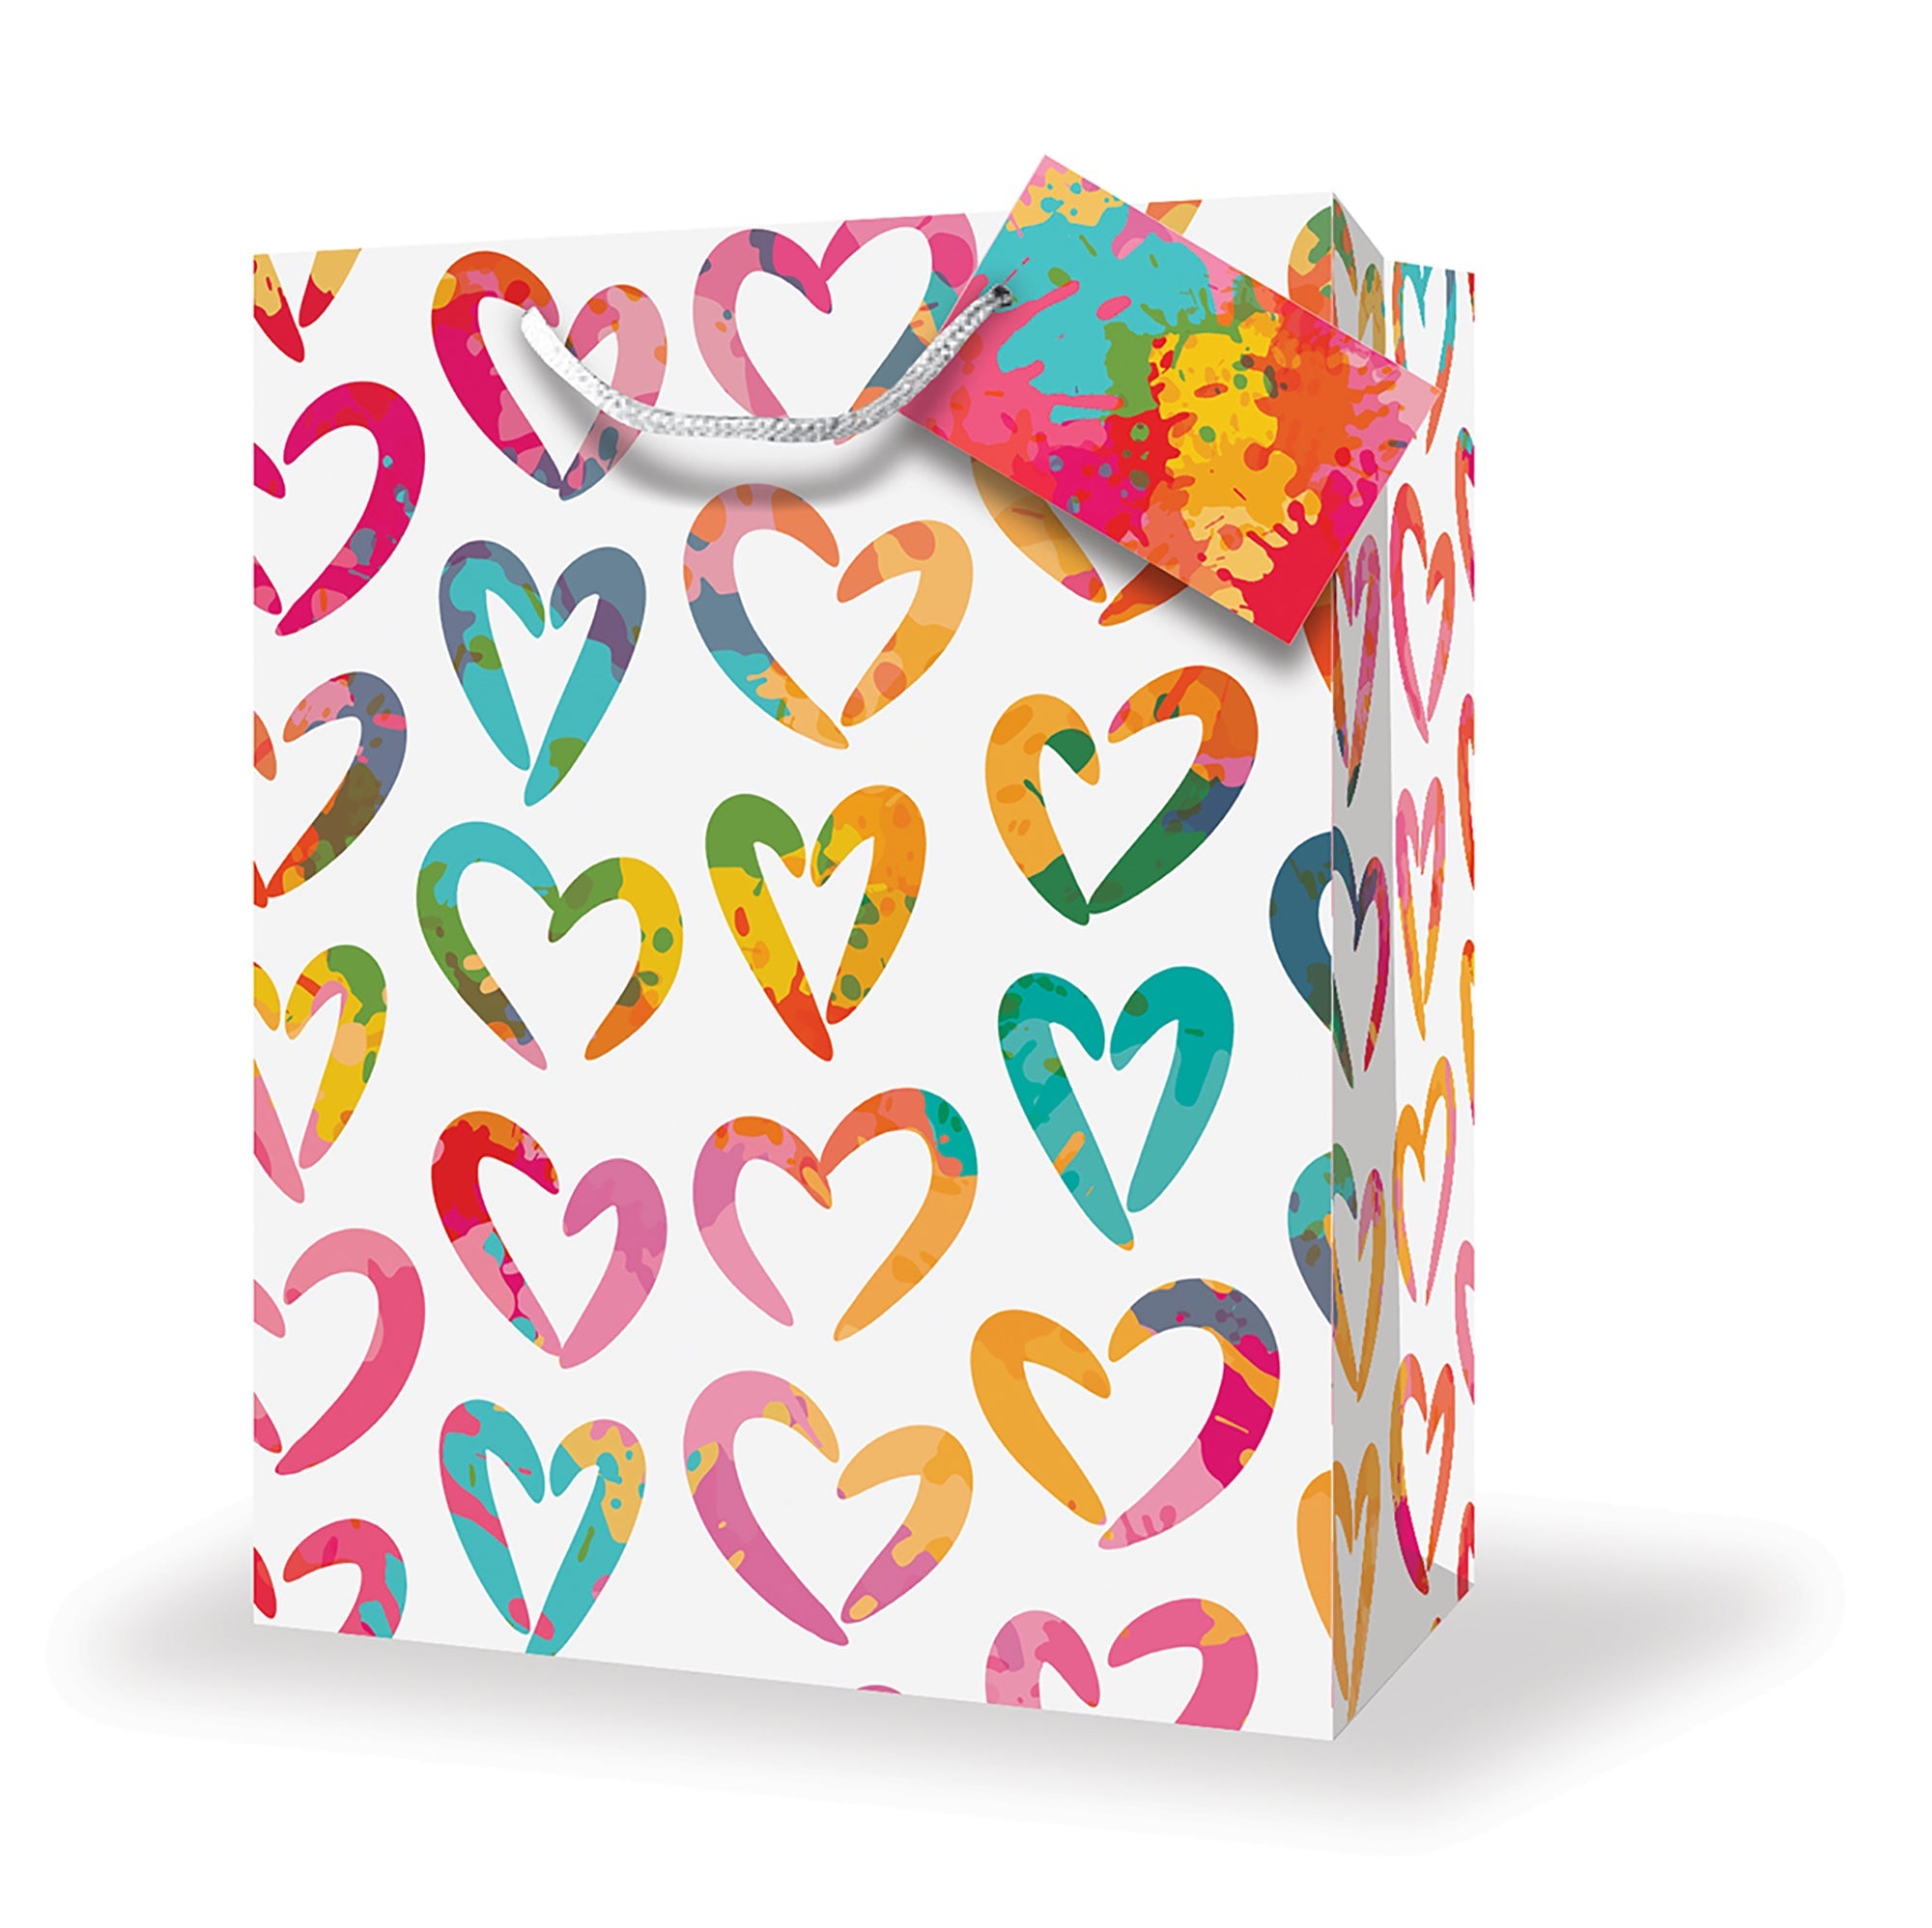 Mill Brook Gift Bag - Hearts Small 5.75x4x2.5in